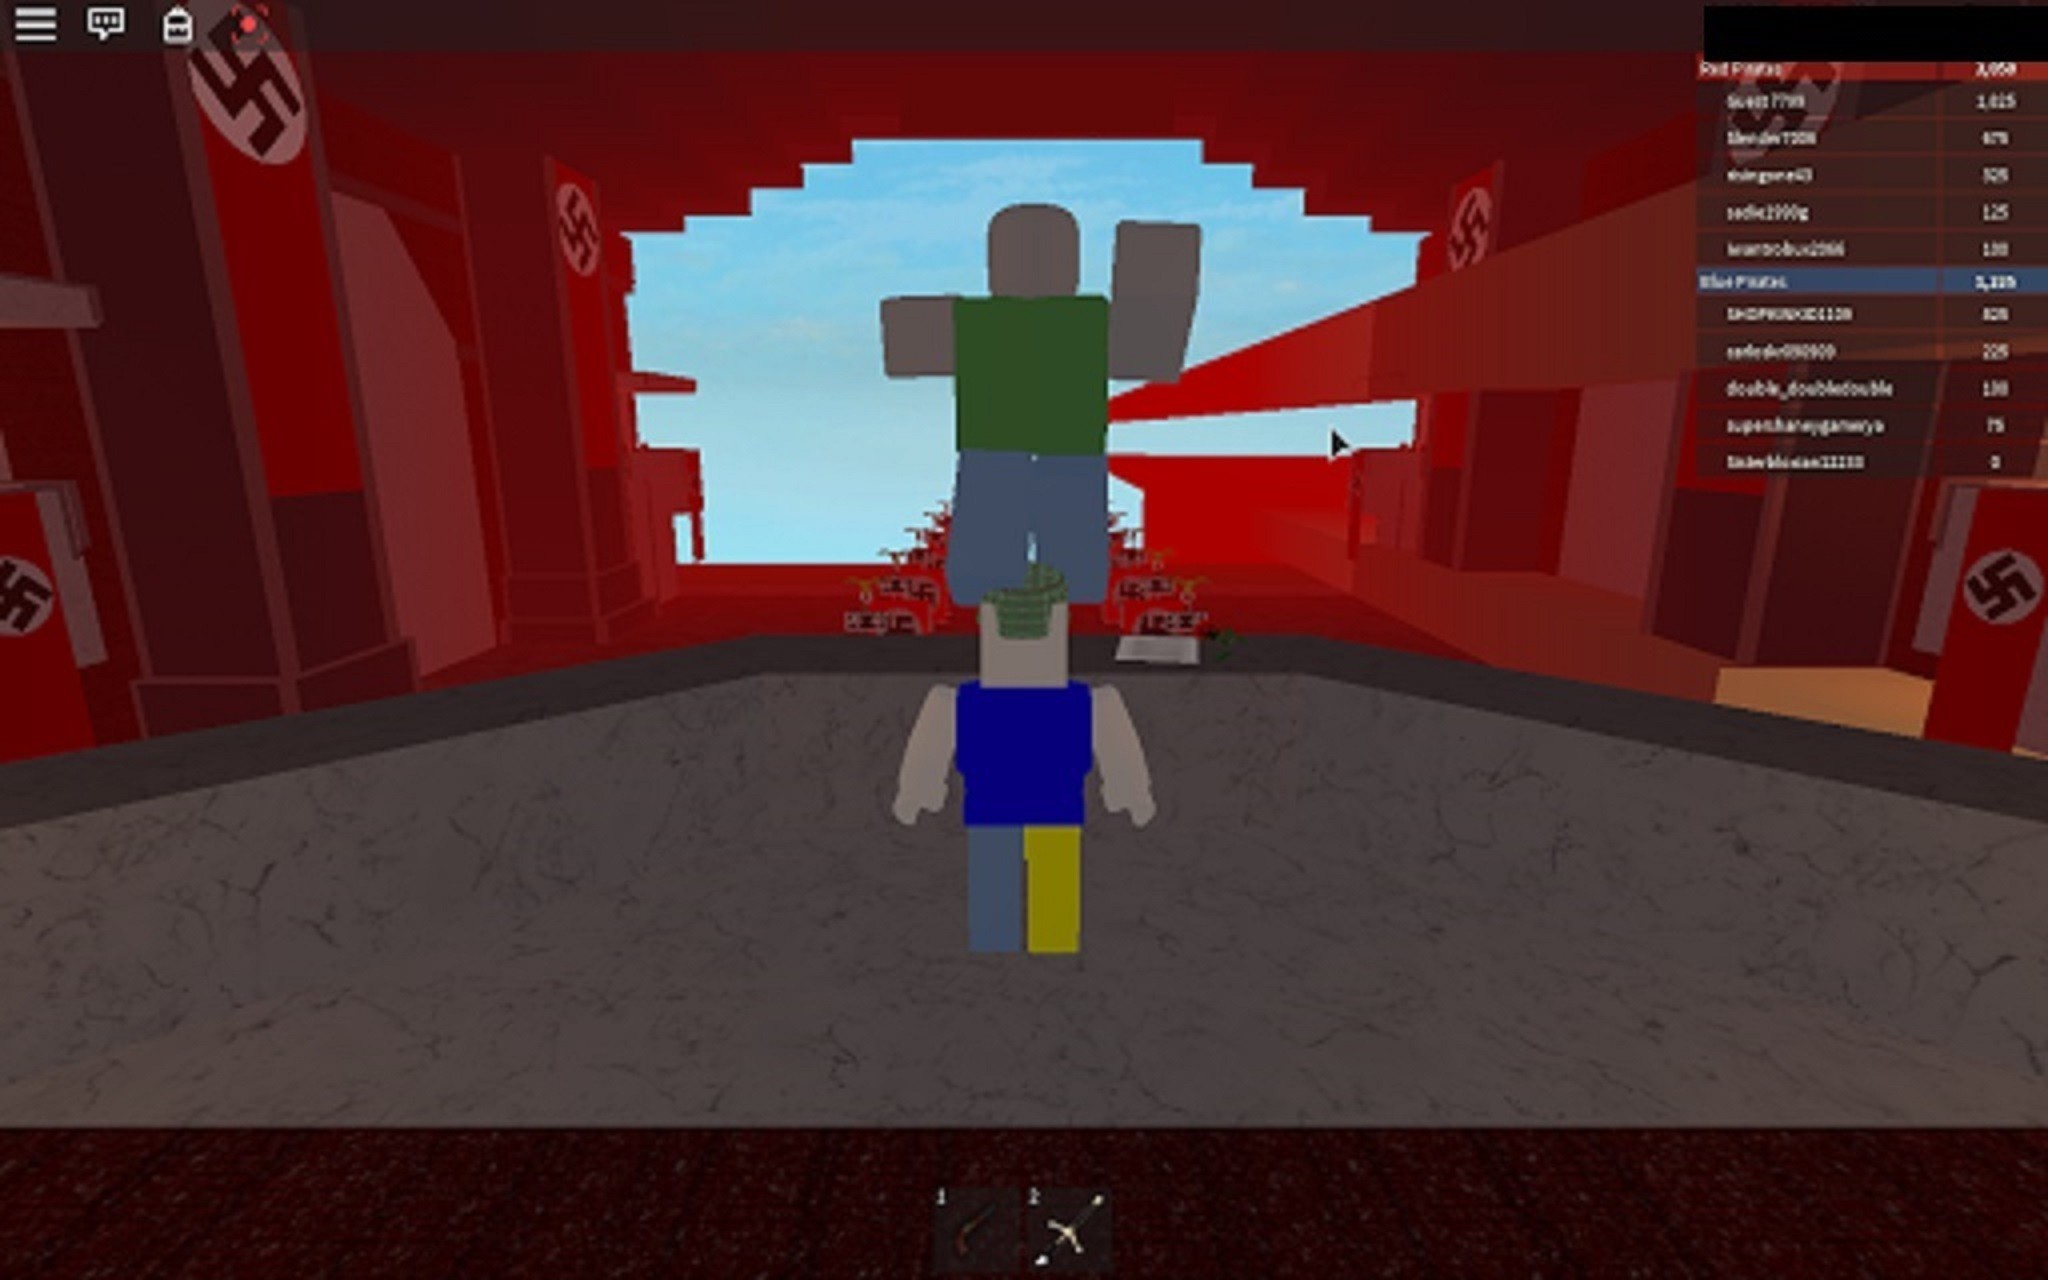 Porn And Swastikas Have Infiltrated Roblox - roblox bypassed ids some nazi